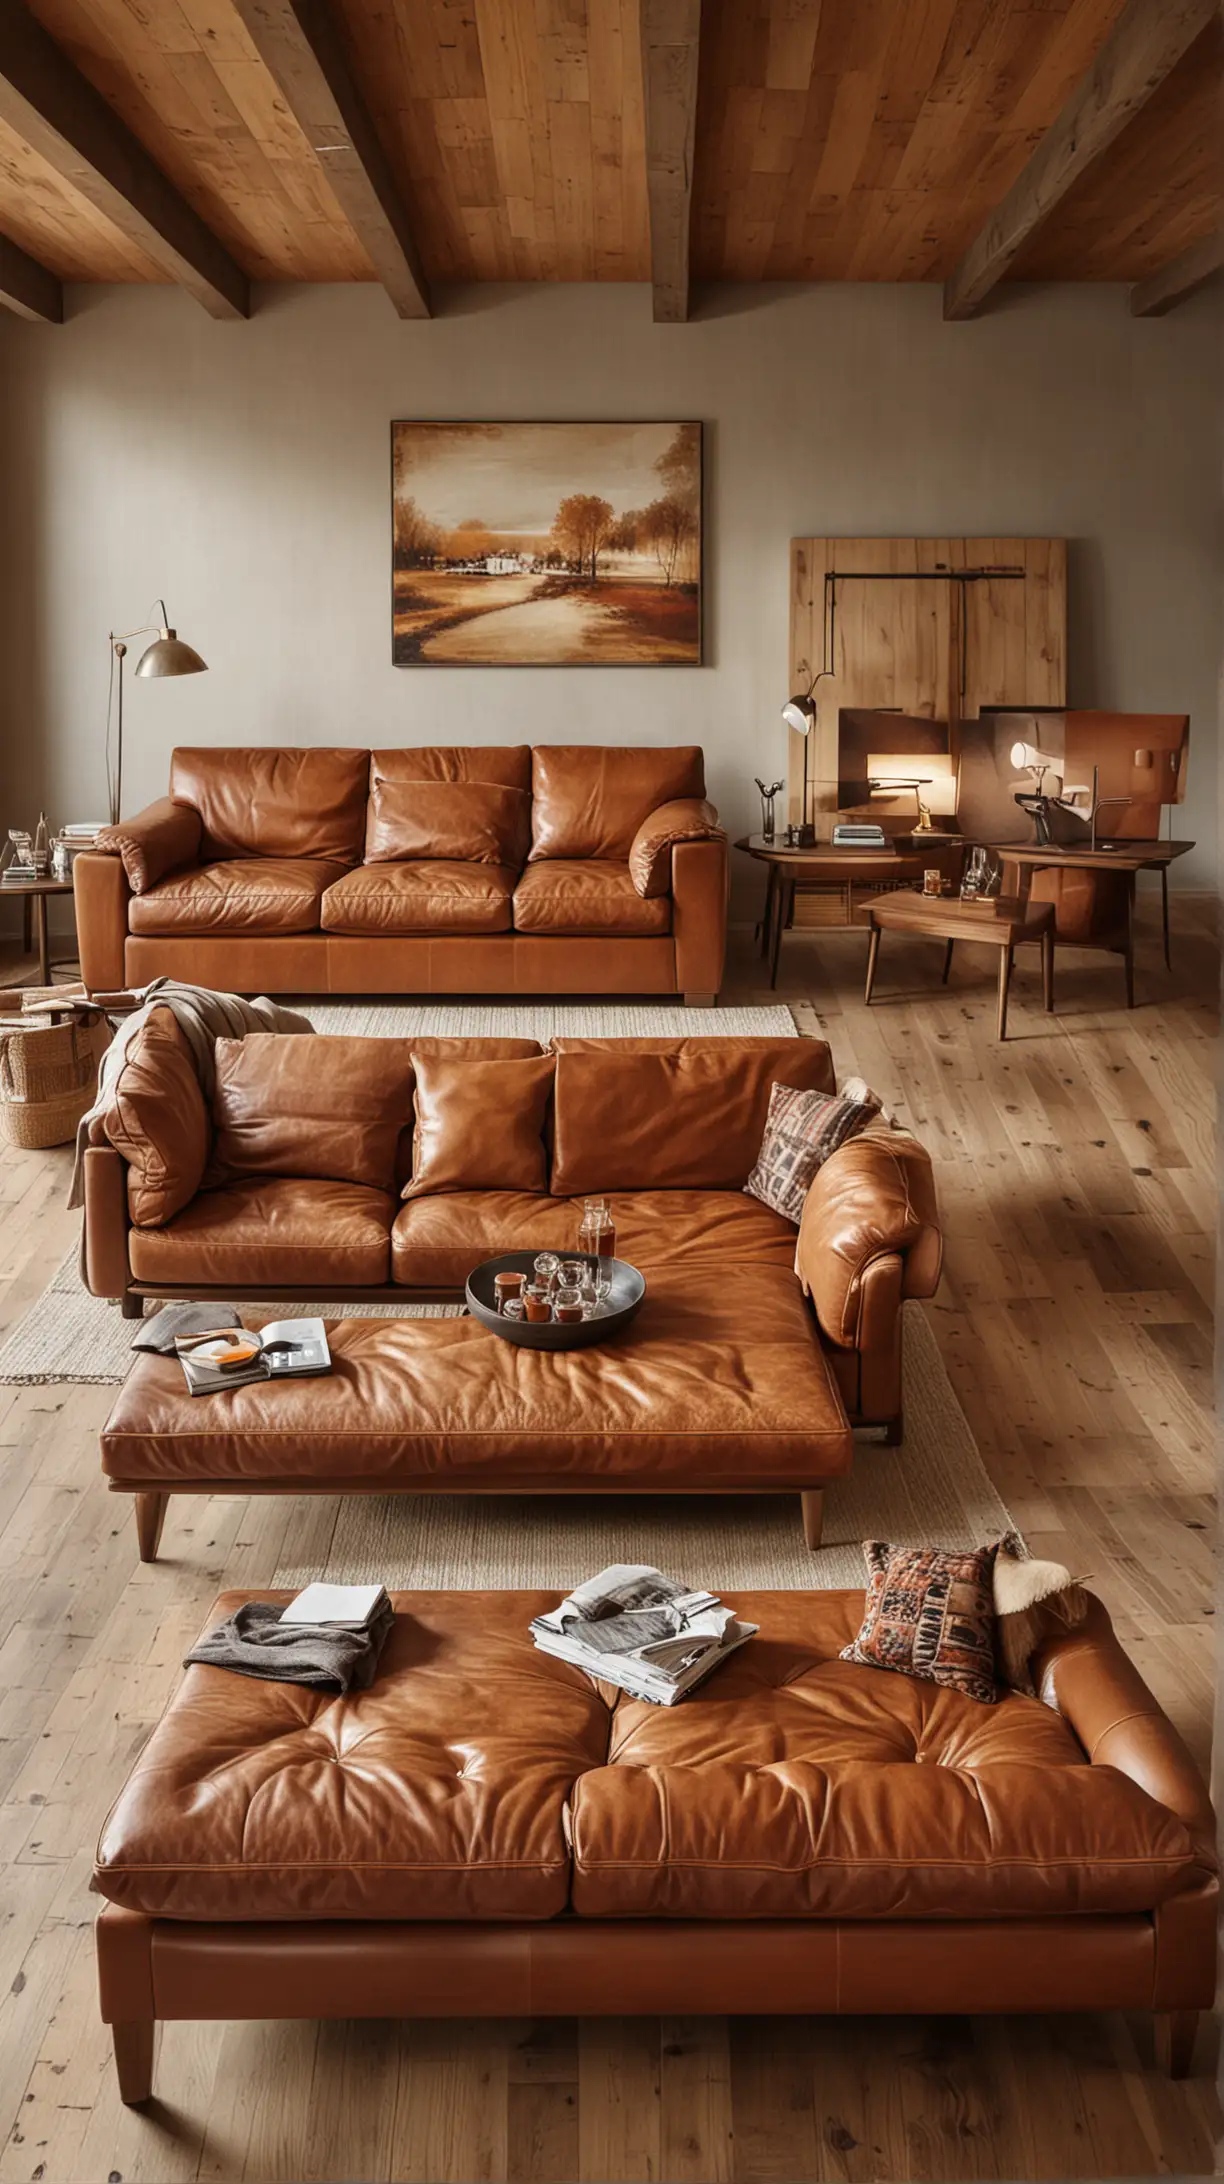 Cozy Living Room with Cognac Leather Couch and Warm Wooden Furniture